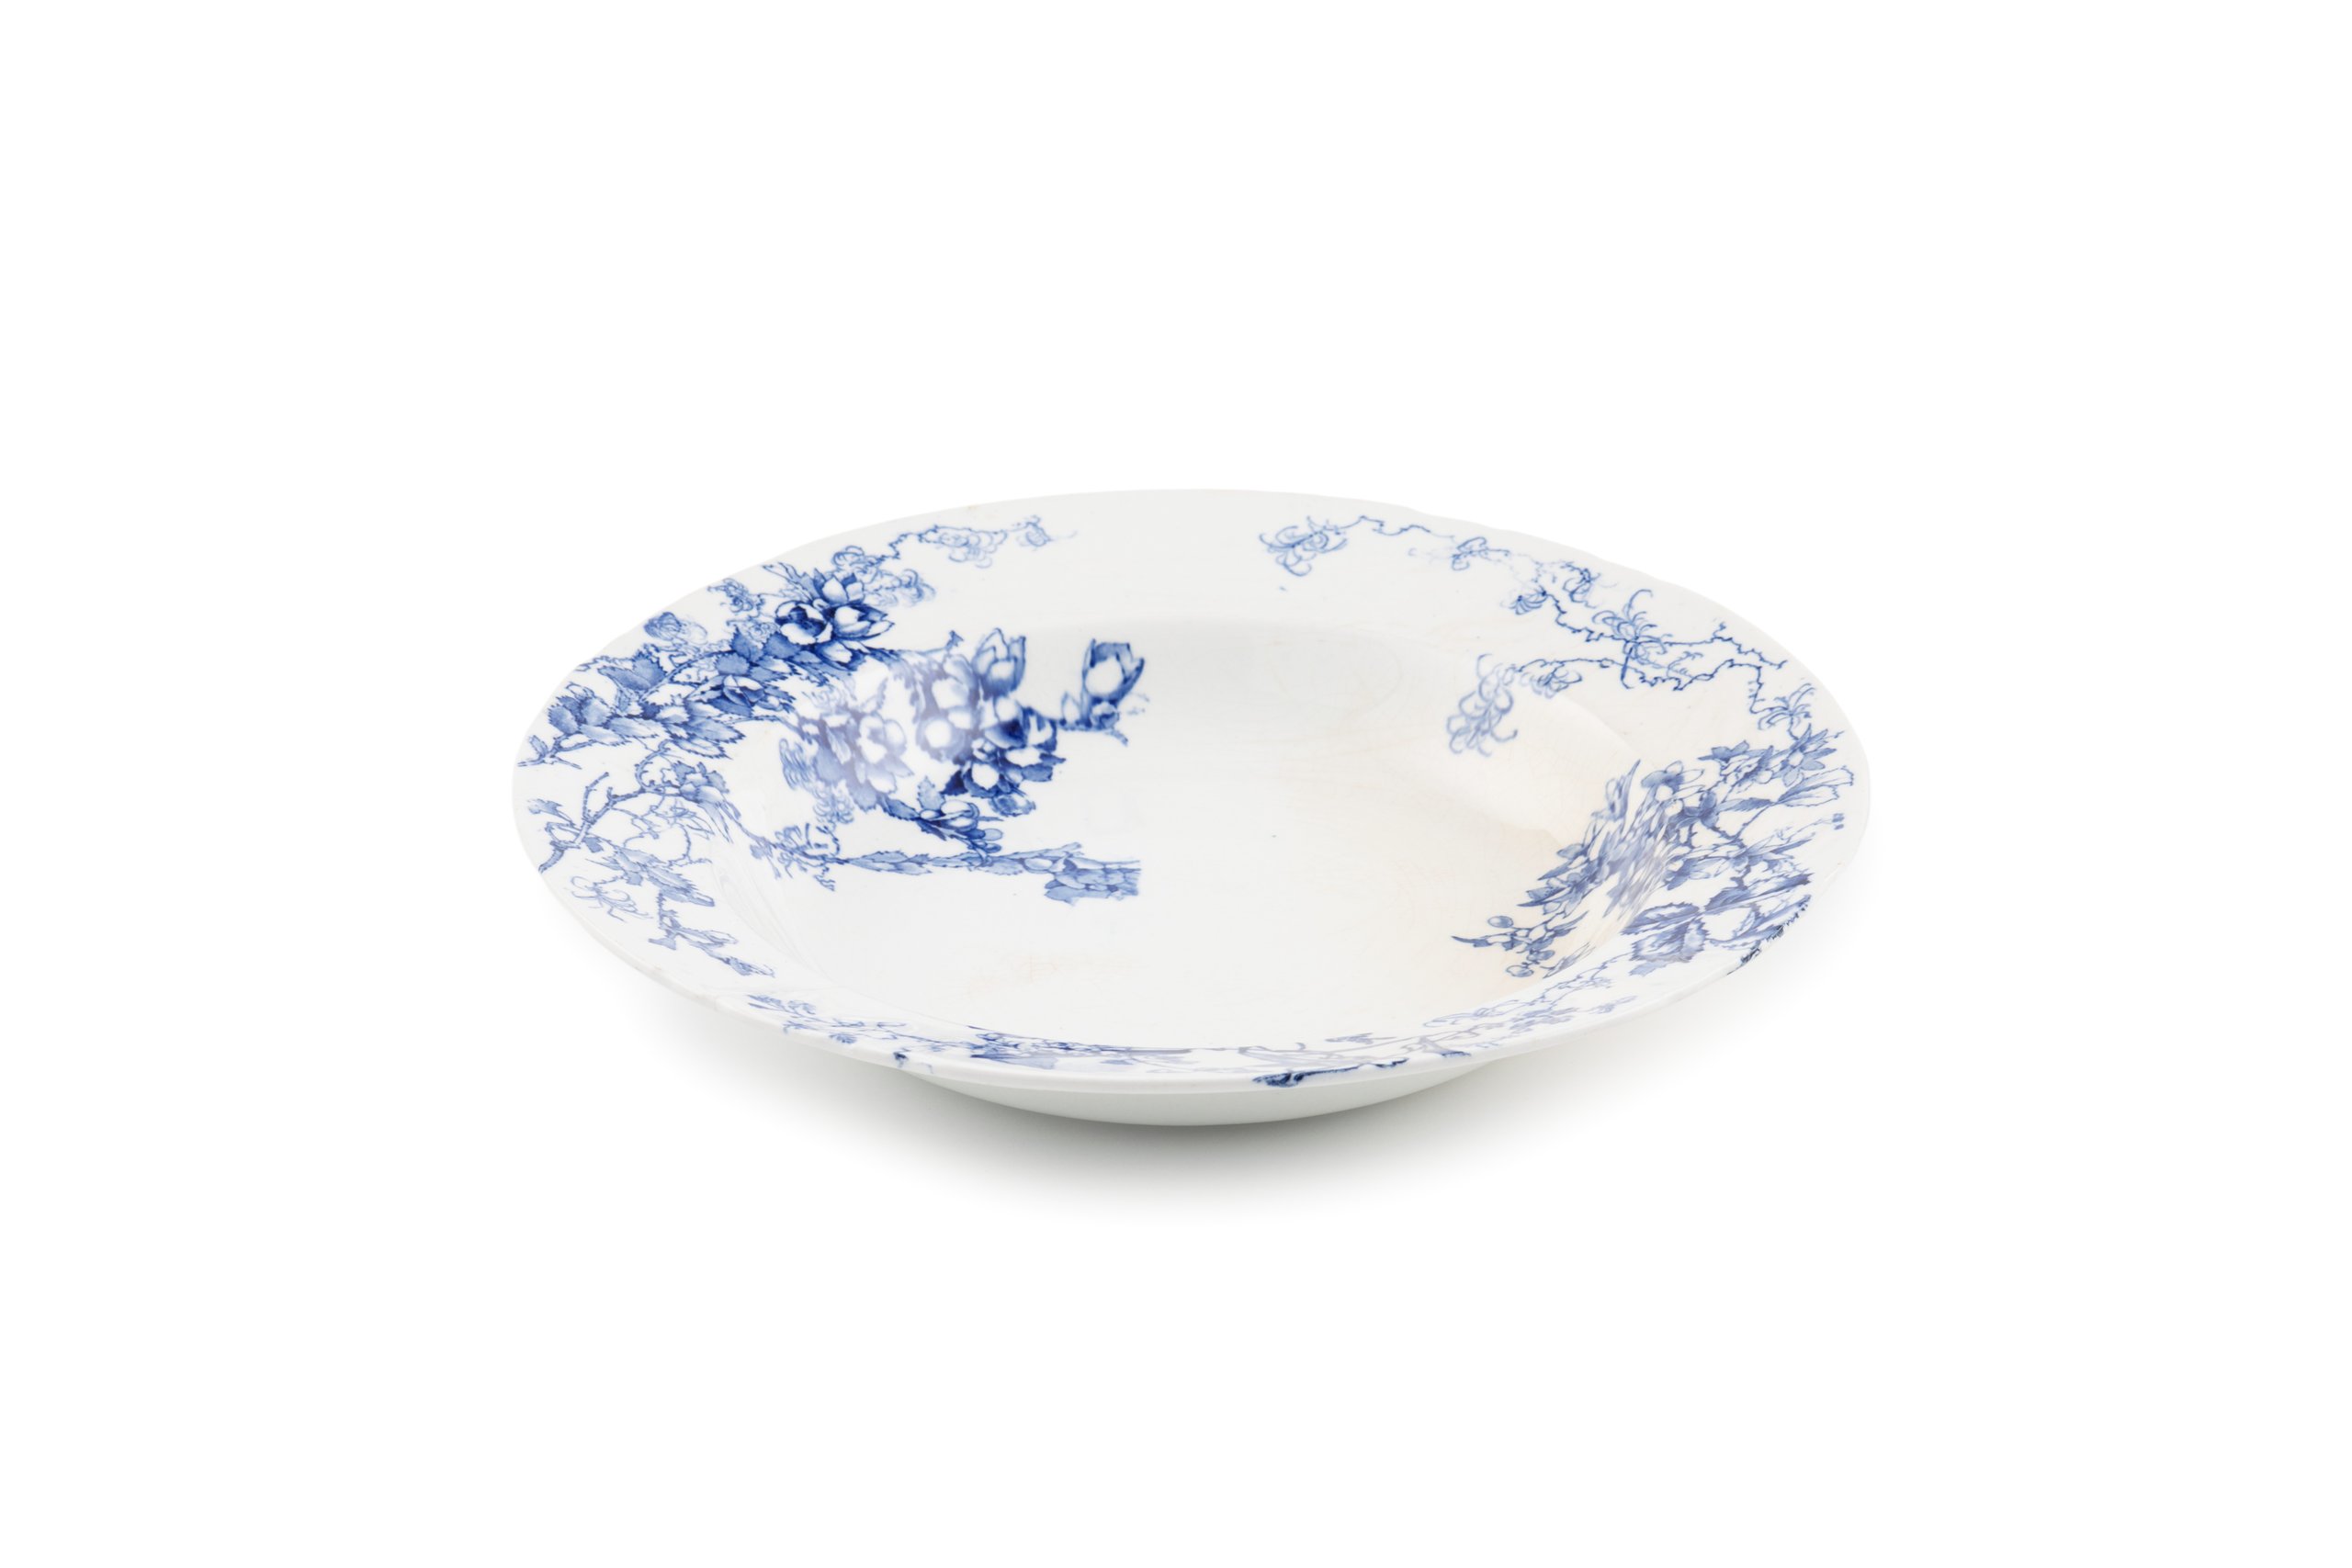 'Manly Beach' dish by Royal Doulton